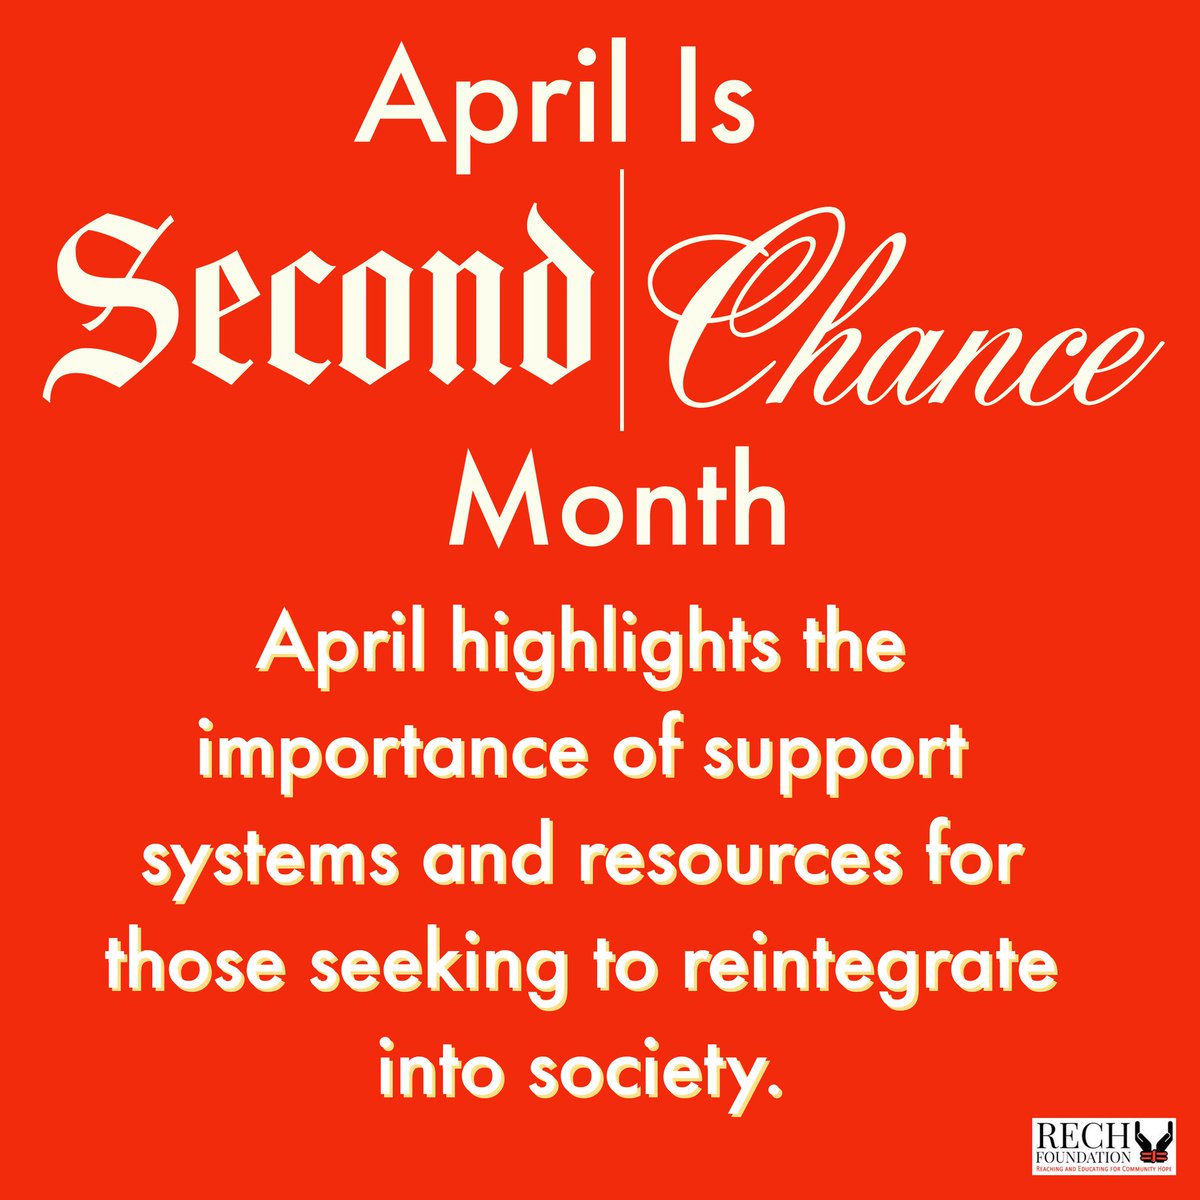 April highlights the importance of support systems & resources for those seeking to reintegrate into society. In DC seeking White House #secondchances through #clemency #pardons #rehabilitation
#reentry #reintegration #helpinthehouse #solutionist #iamaningredient #JusticeGeneral